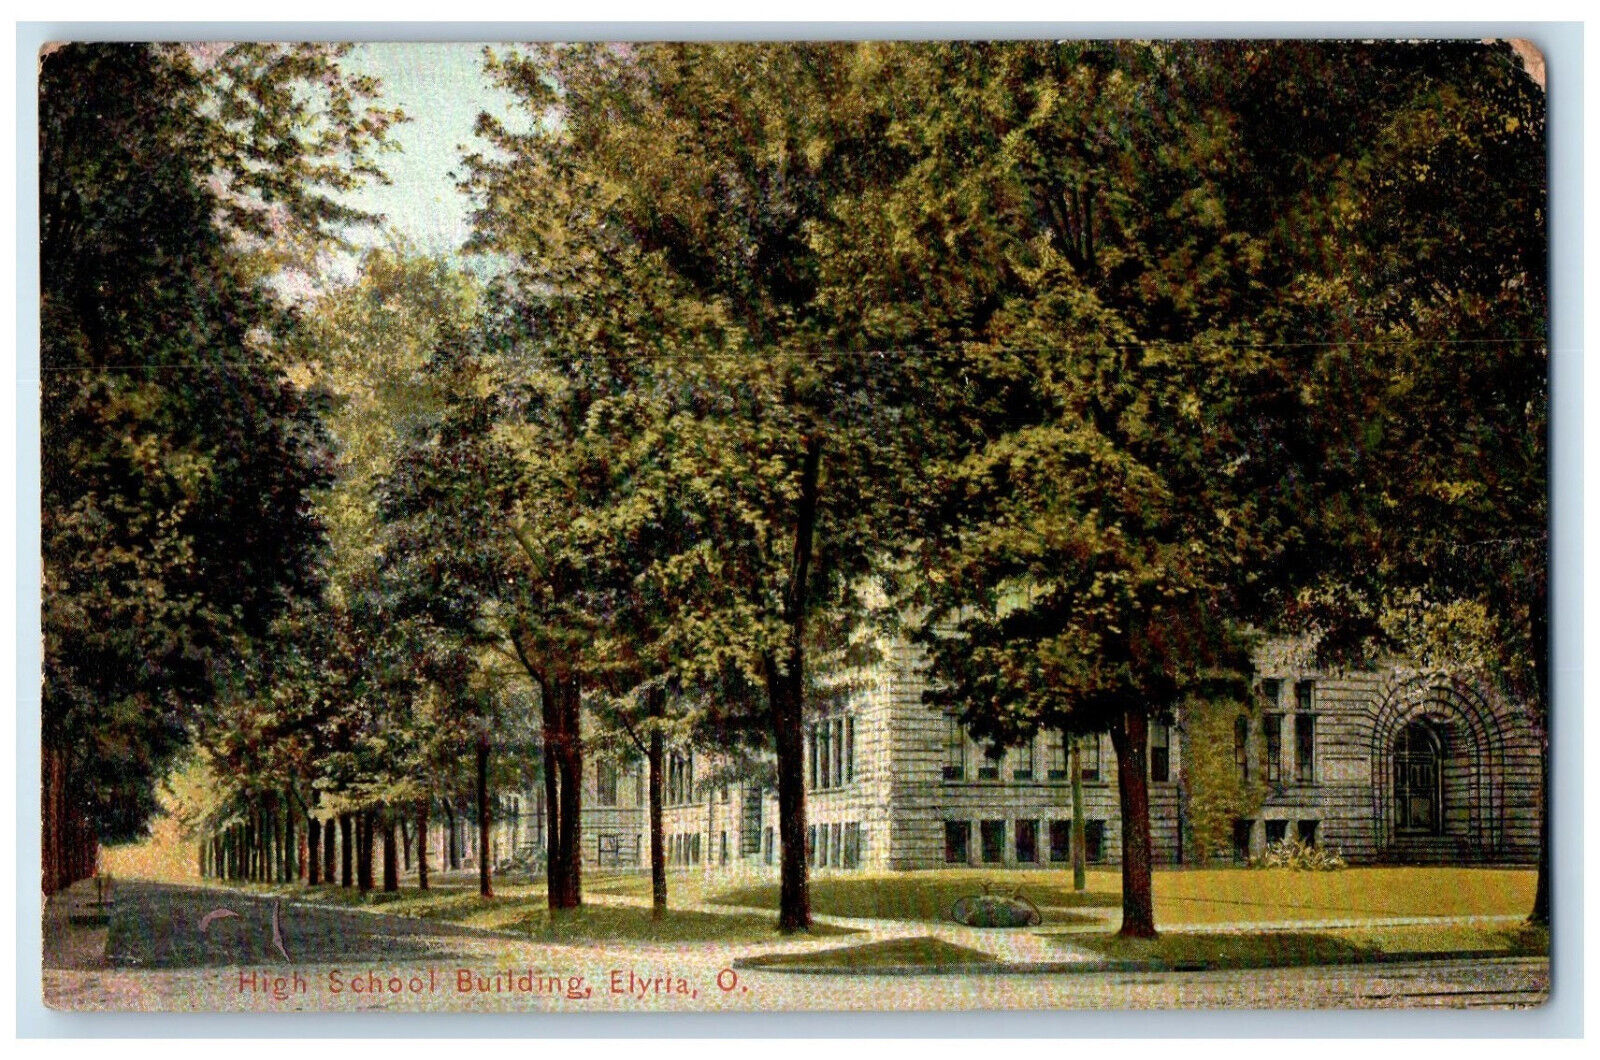 1907 View of High School Building Elyria Ohio OH Antique Posted Postcard